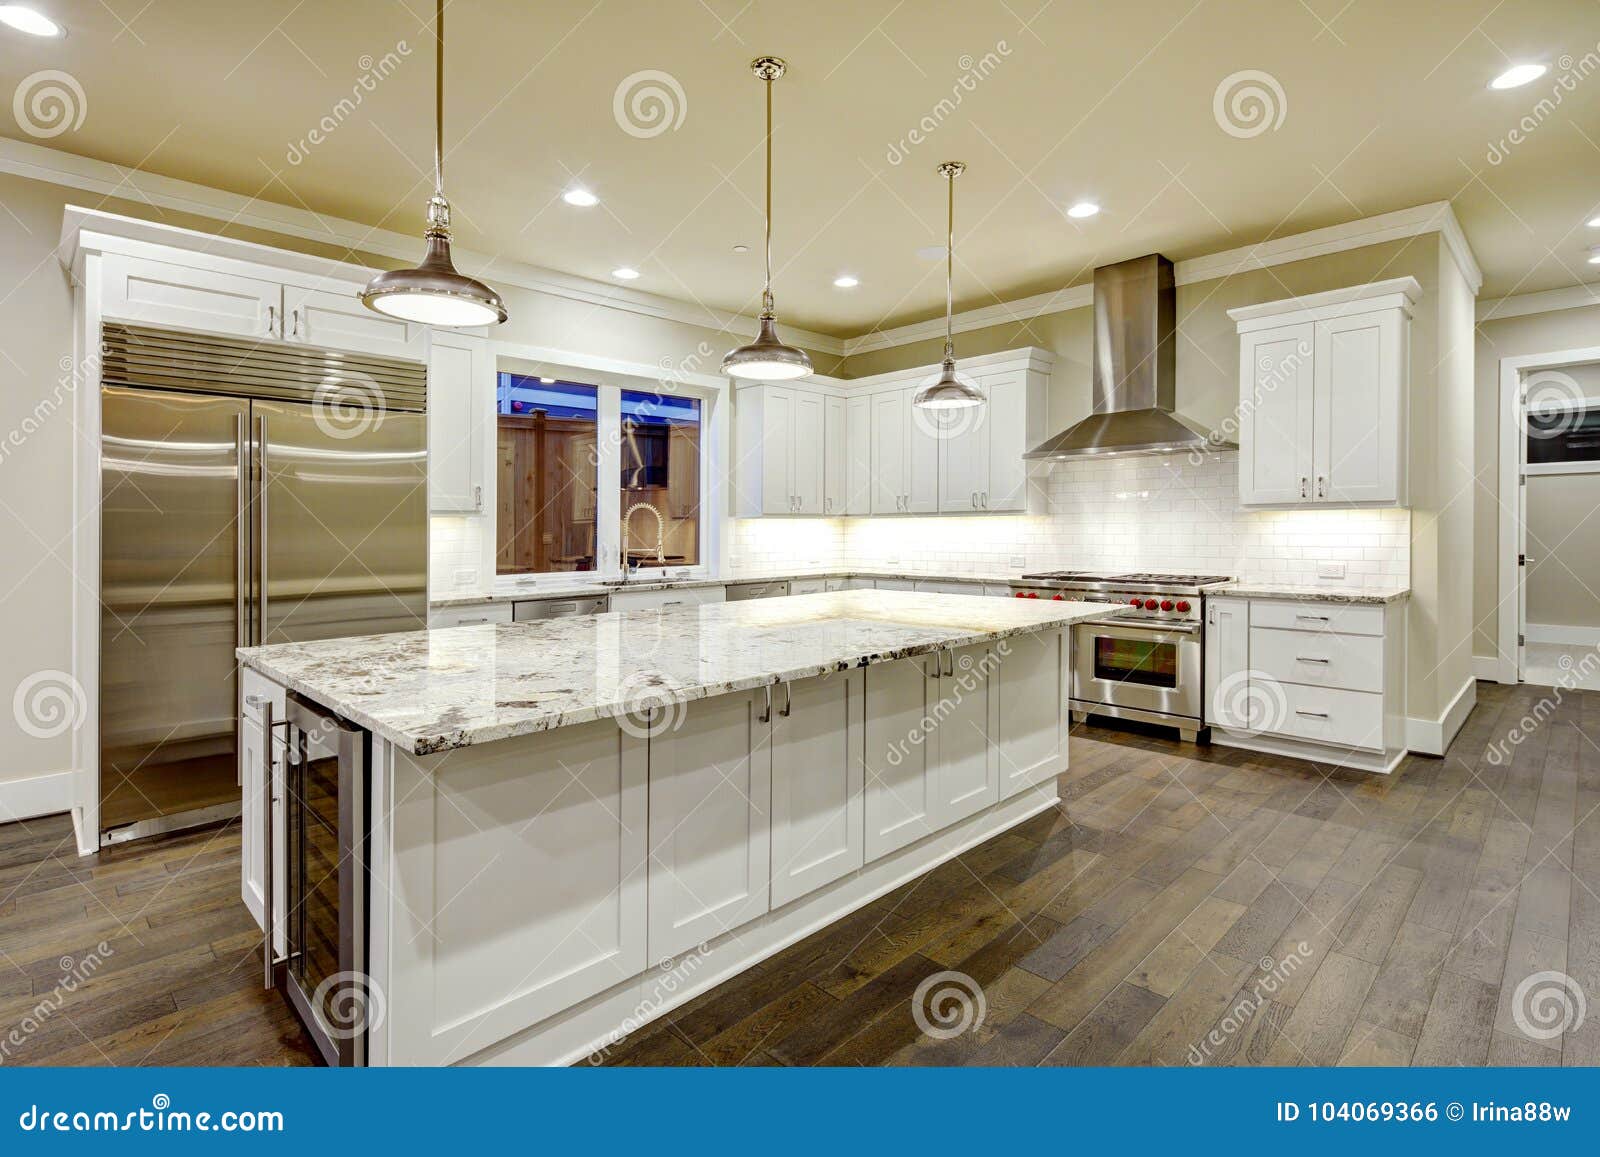 Large Spacious Kitchen Design With White Kitchen Cabinets Stock